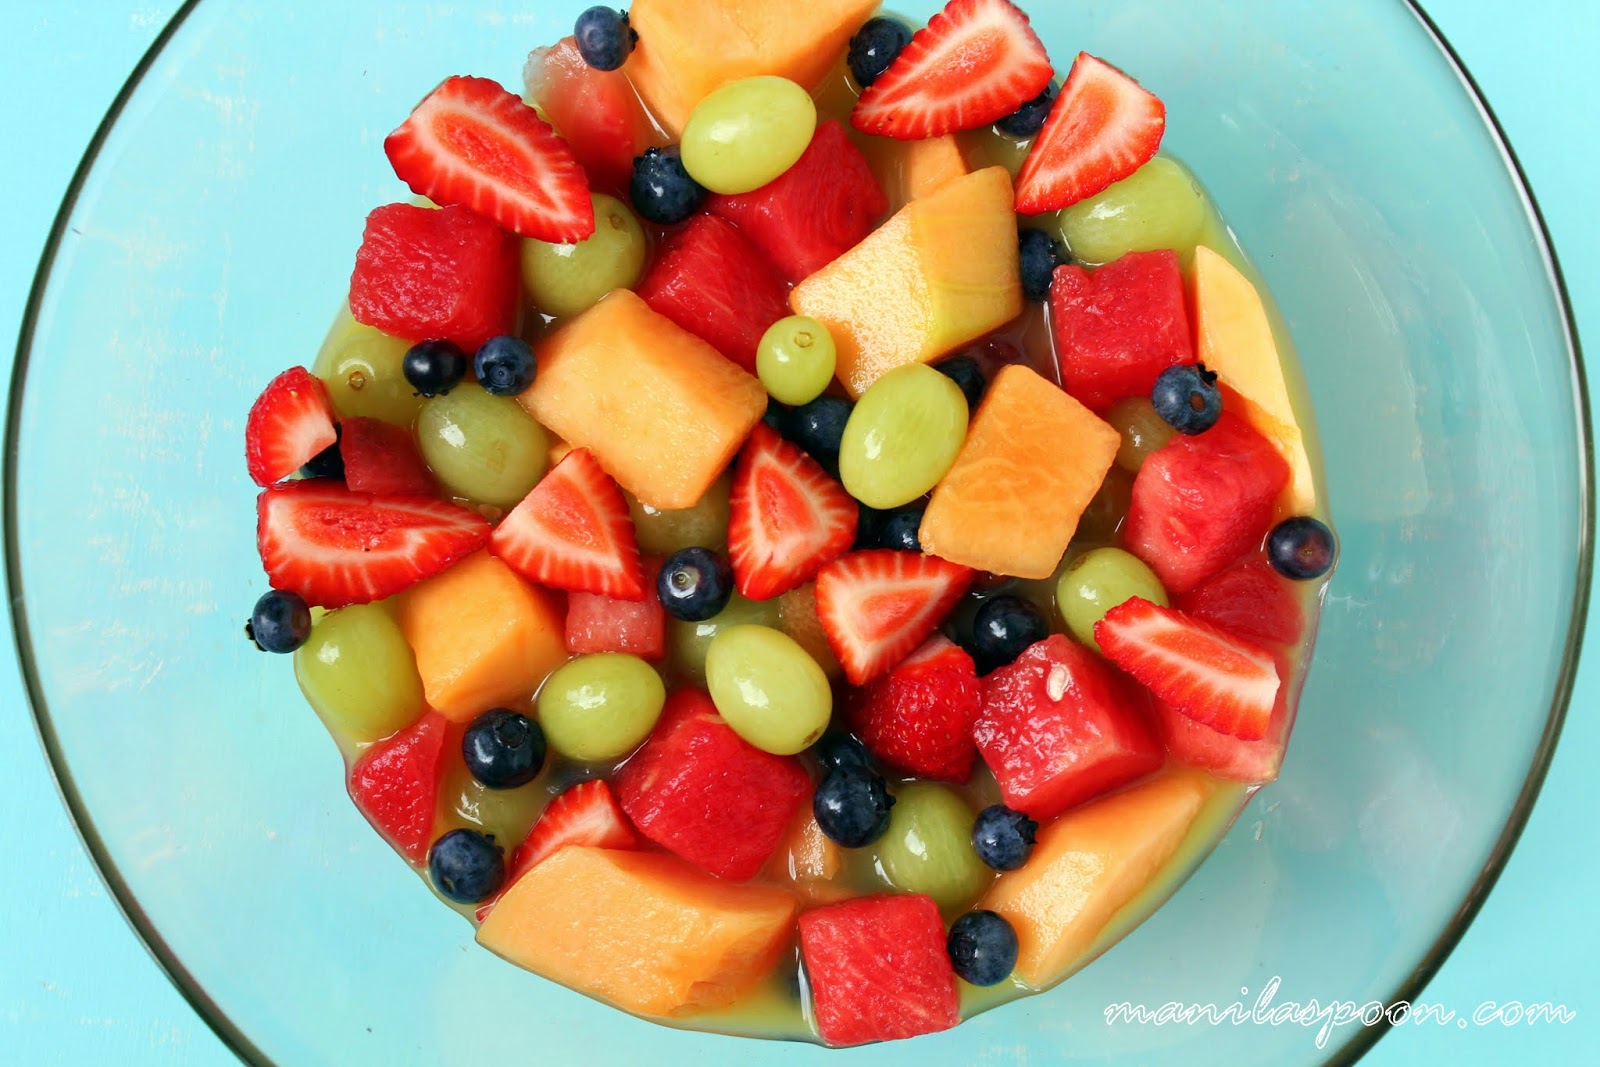 This light and healthy Italian fruit salad is the delicious way to take in all that nutrients from your favorite fruits and berries. So refreshingly good, it's the perfect summer treat!